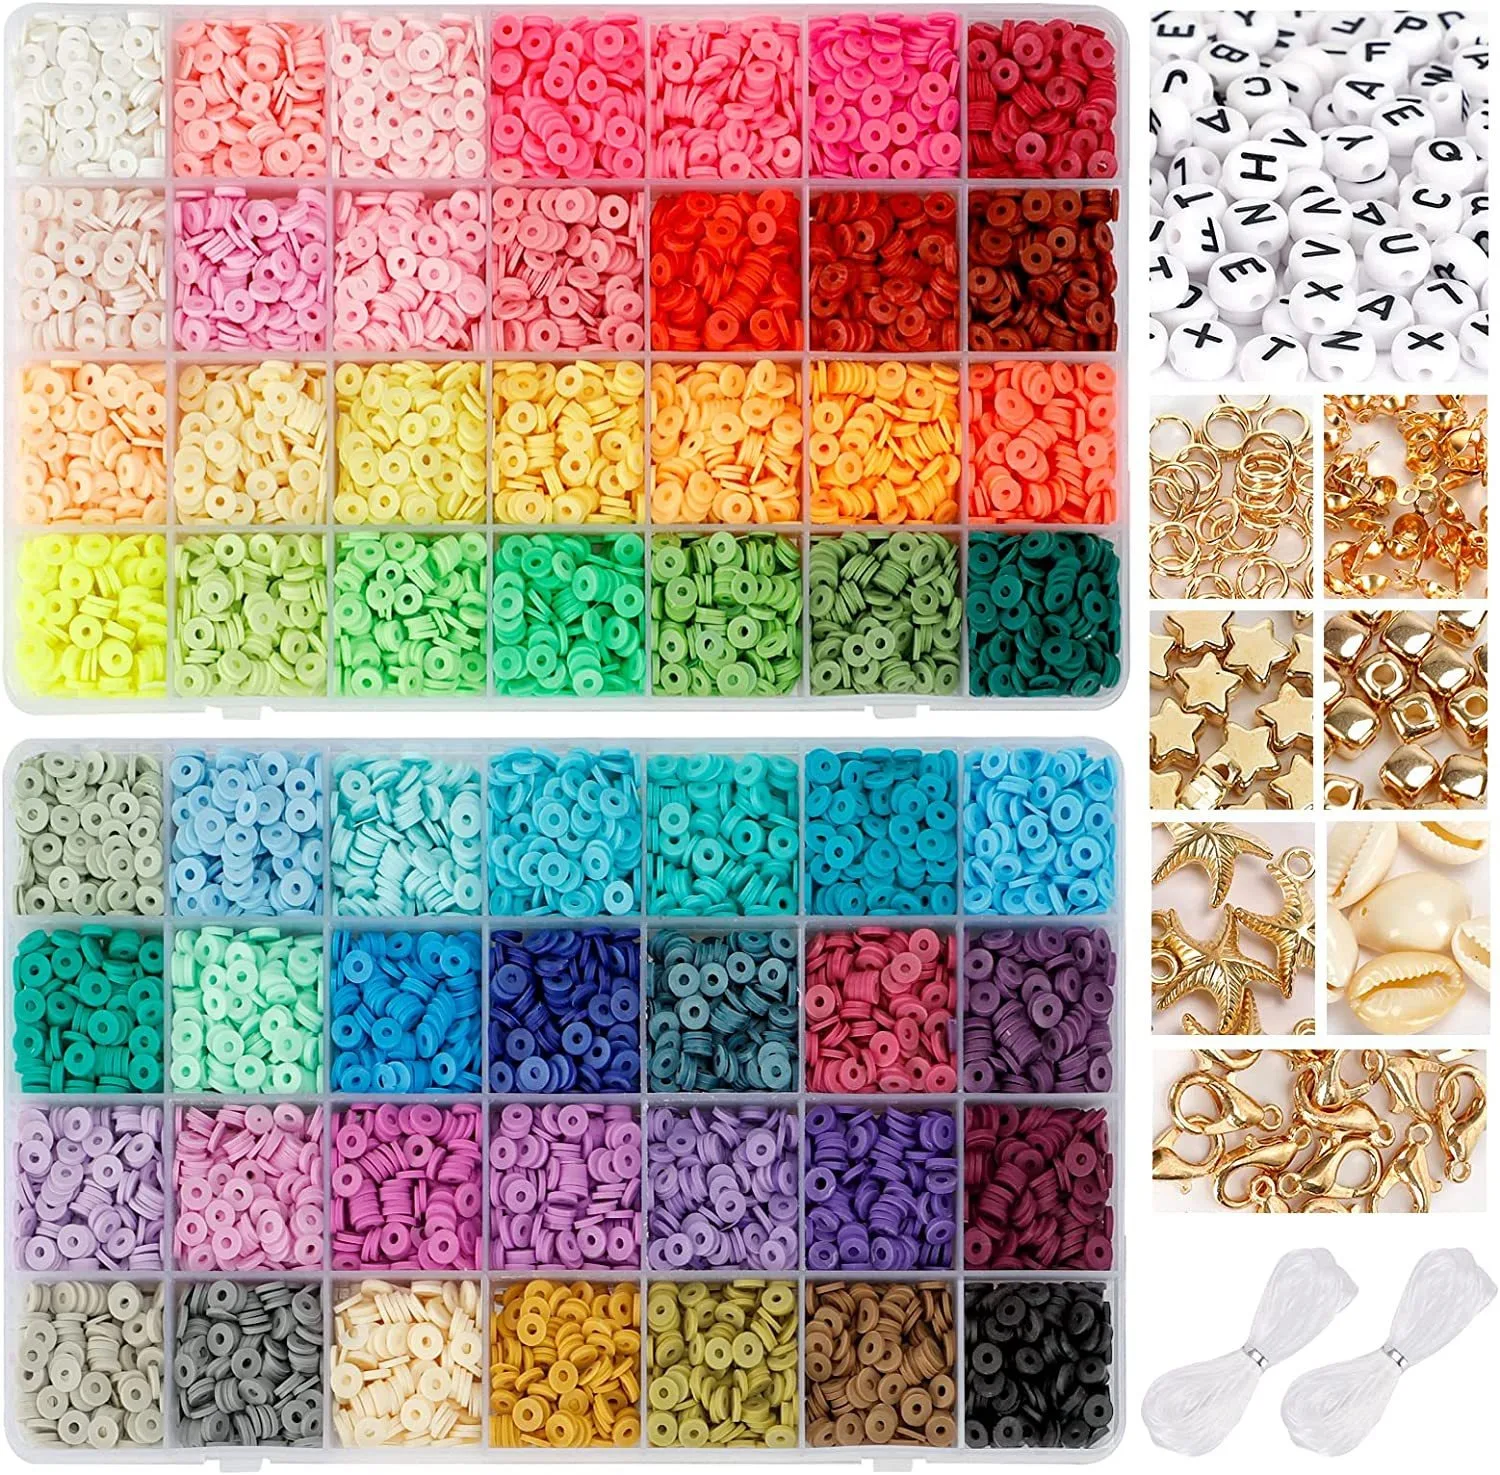 FMCB007 12600pcs 84 Colors Clay Beads Kit for Bracelet Making Heishi Beads Flat Round Polymer Clay Spacer Beads Crafts